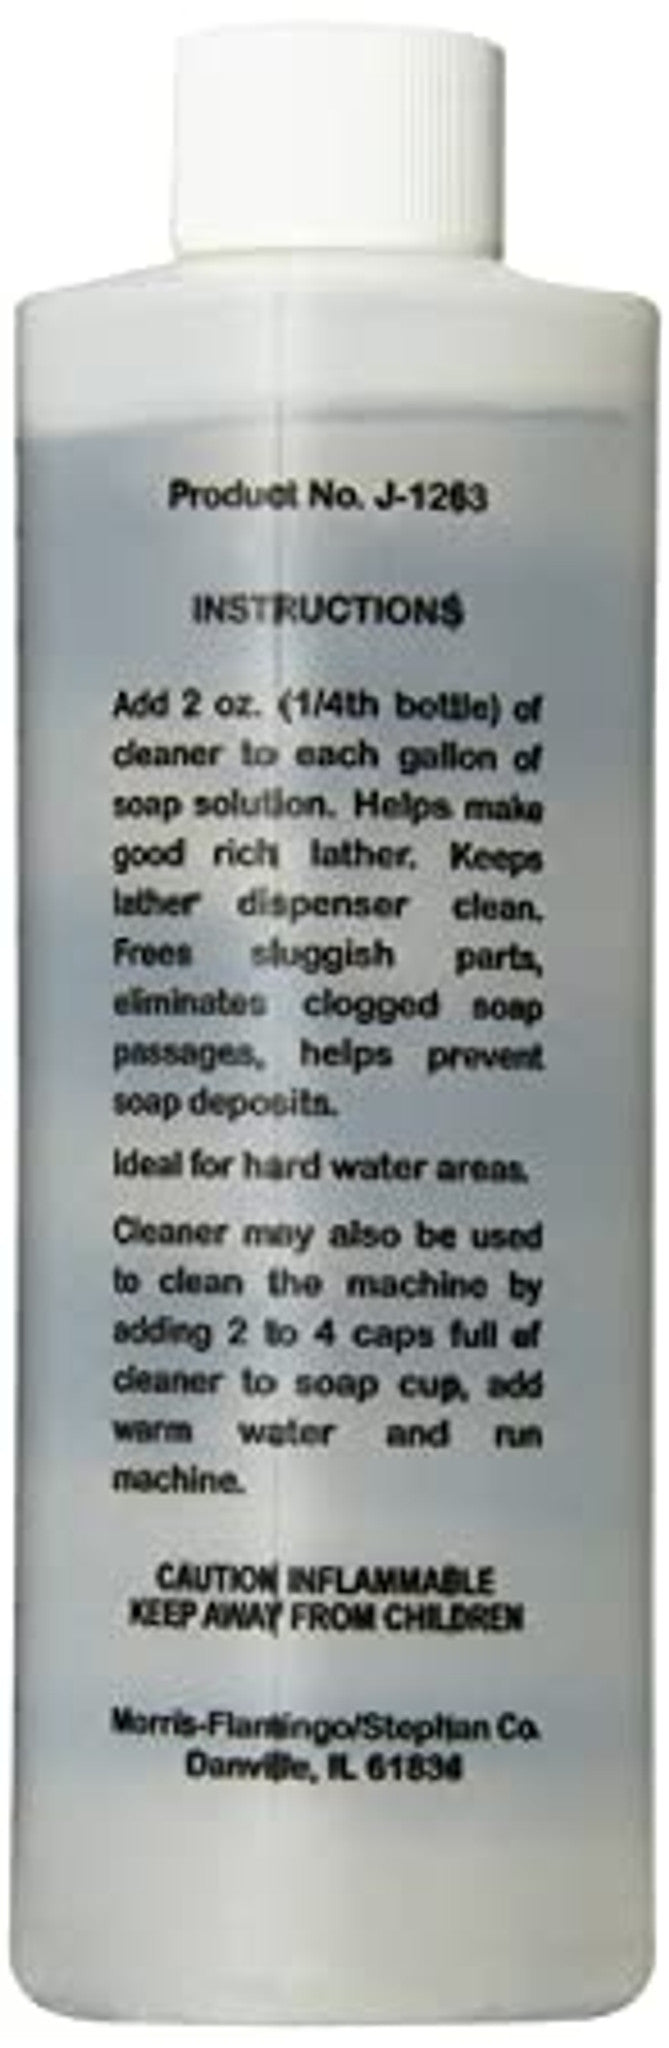 Campbell's Lather King Cleaner - 8oz